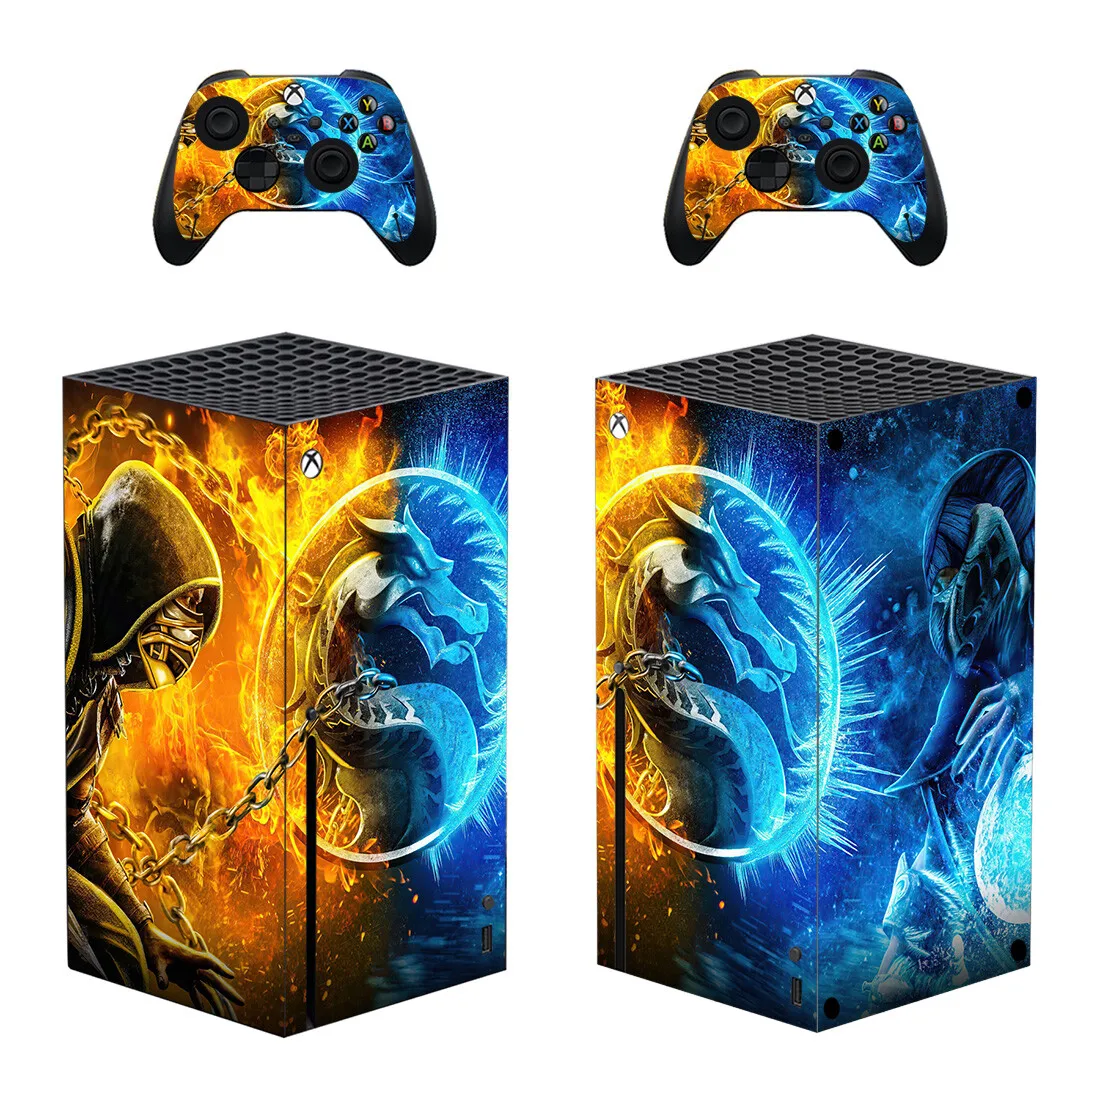 

Mortal Kombat Protector Sticker Decal Cover for Xbox Series X Console and 2 Contracollers Xbox Series X XSX Skin Sticker Vinyl